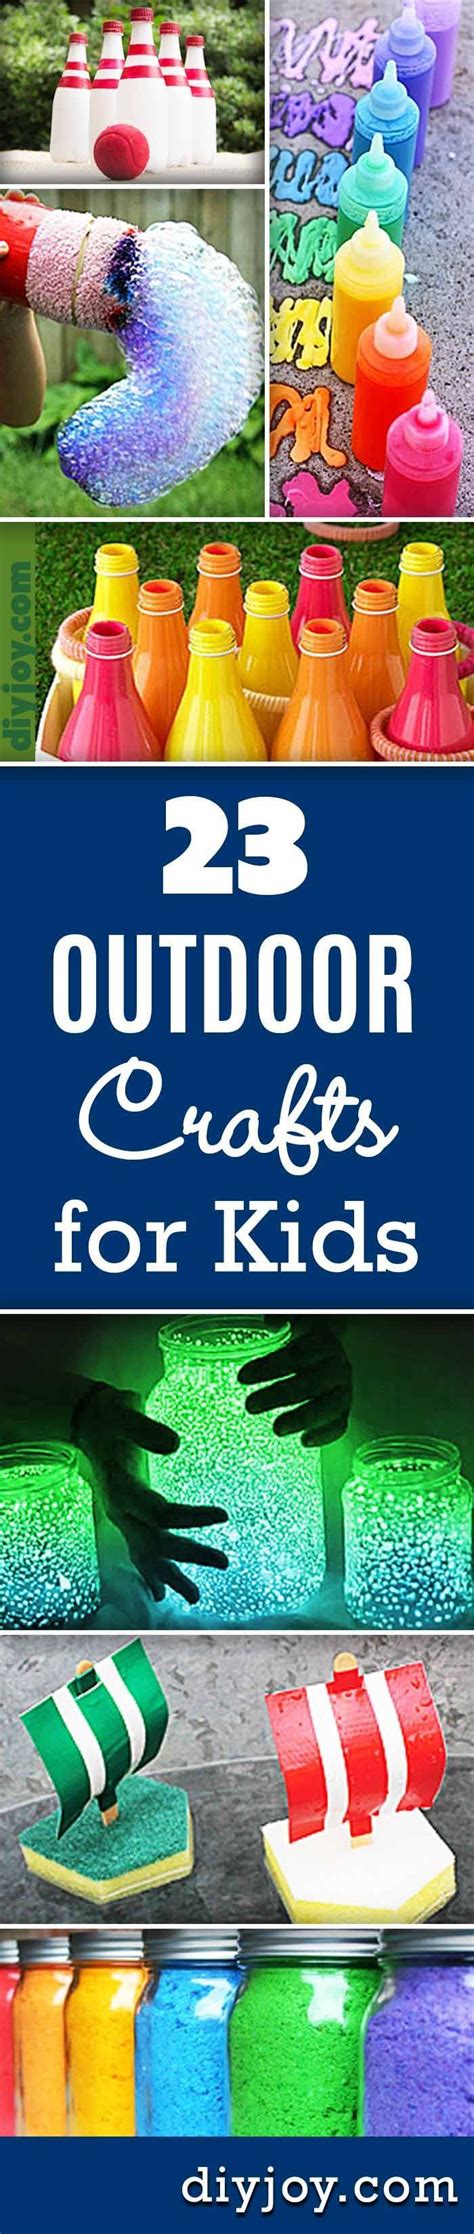 23 Fun Outdoor Crafts For Kids Summer Crafts For Kids Outdoor Crafts